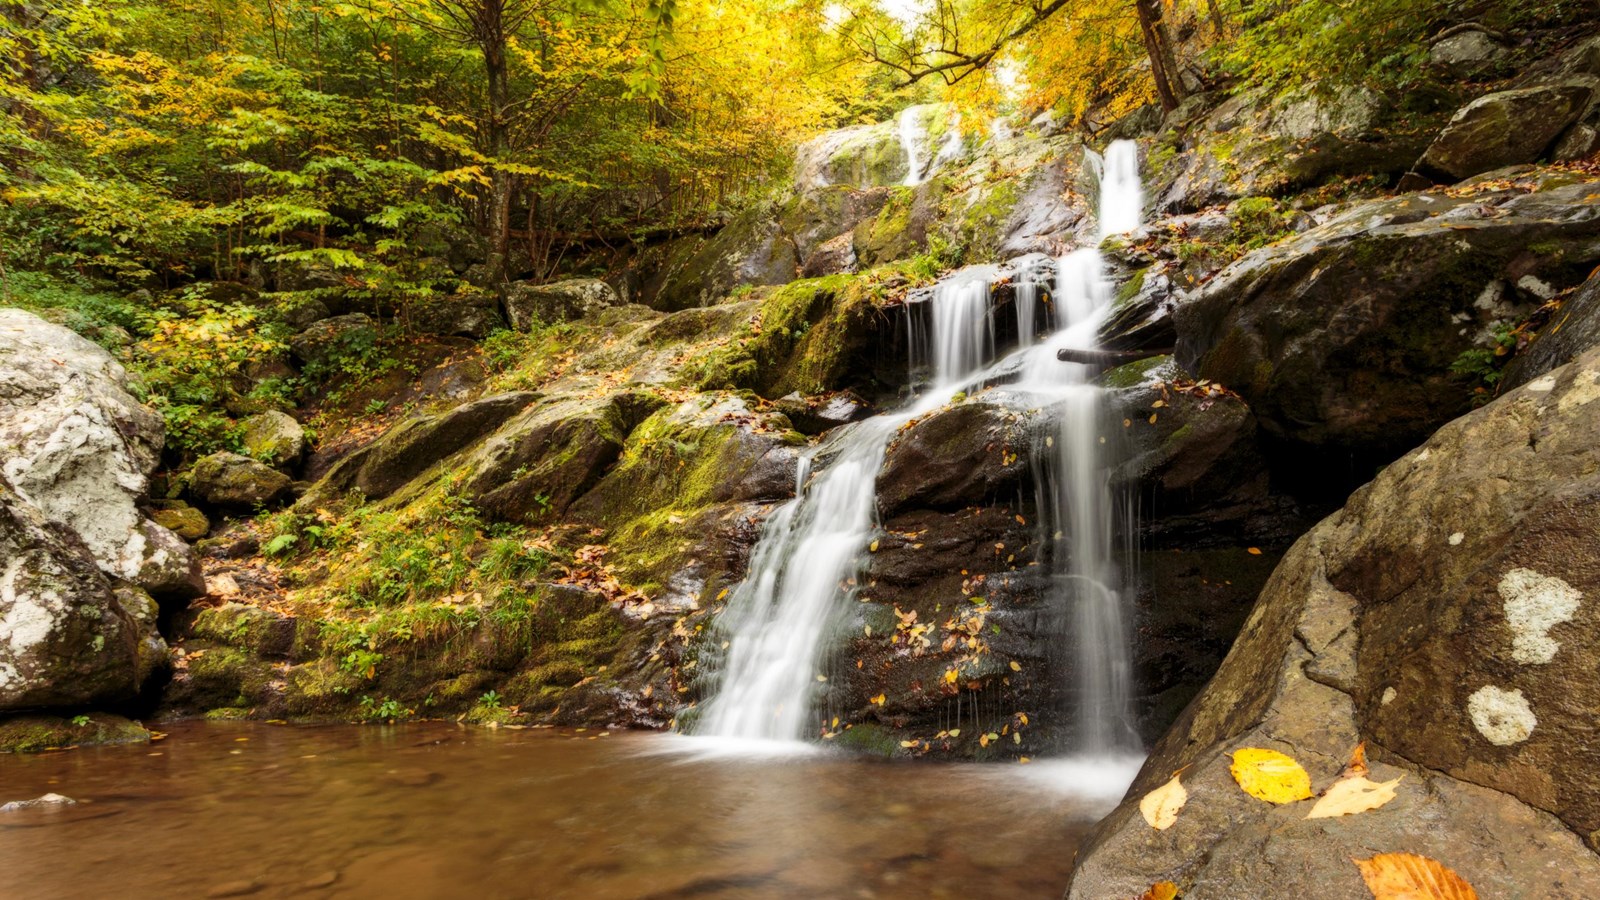 A waterfall cascades under trees with the yellow leaves of fall.